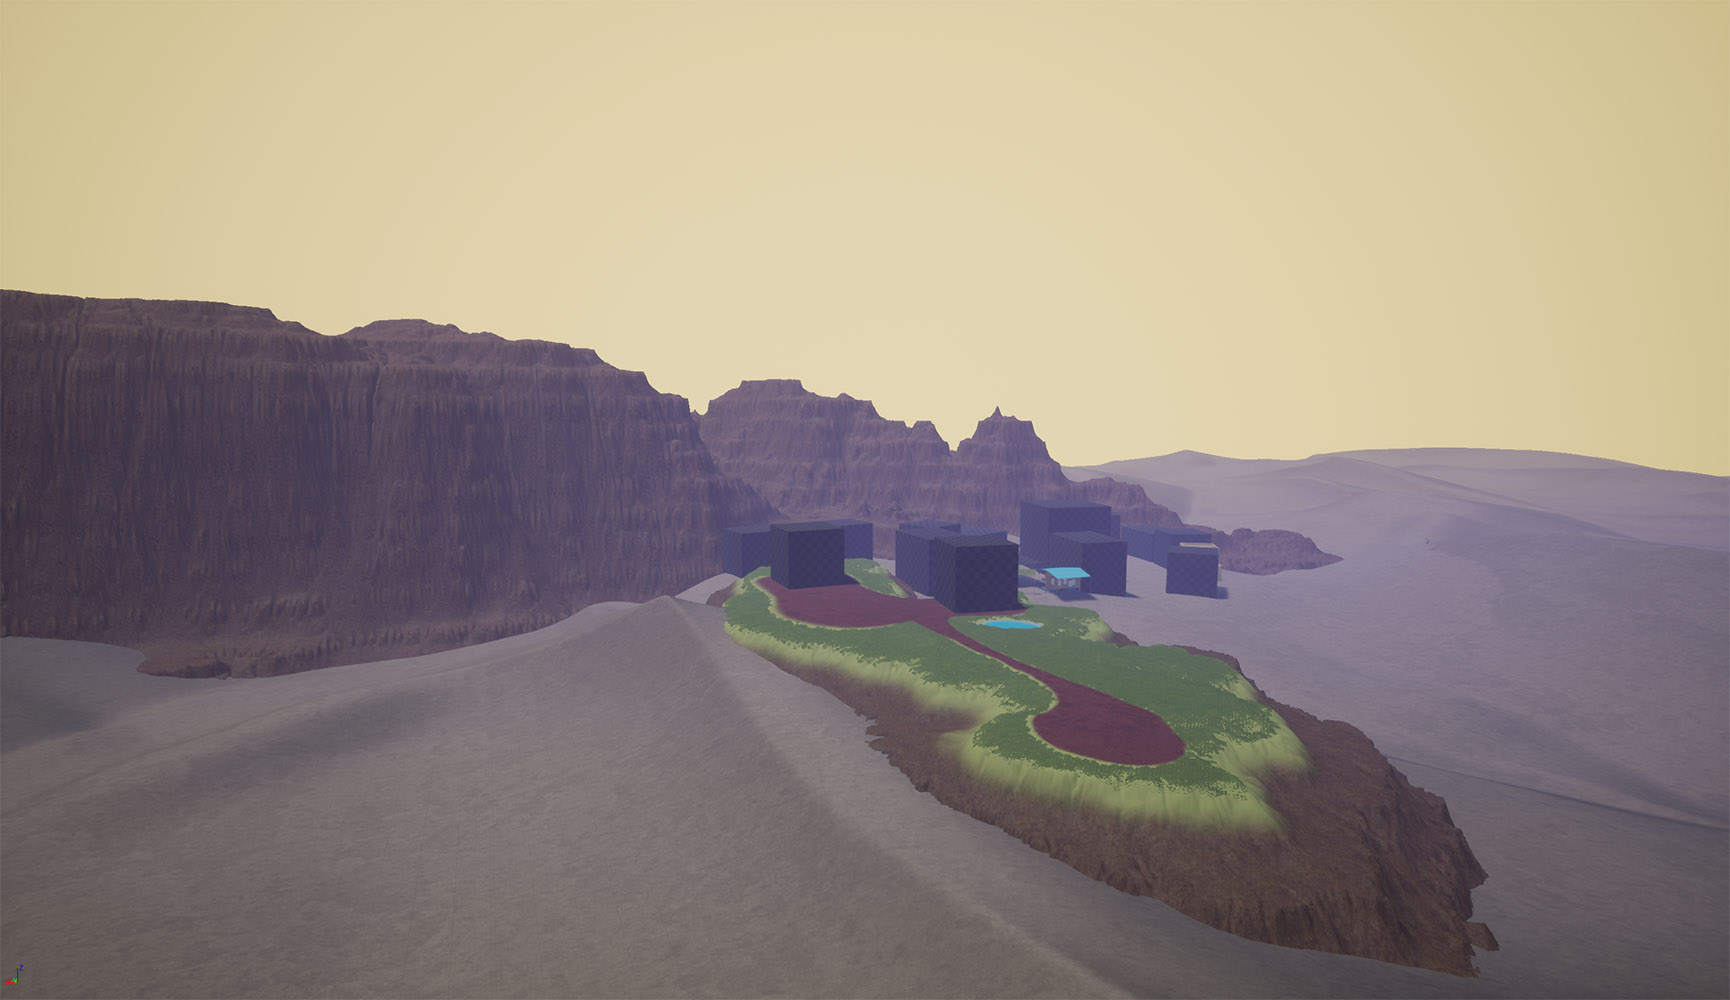 game screenshot, a small town in a desert oasis